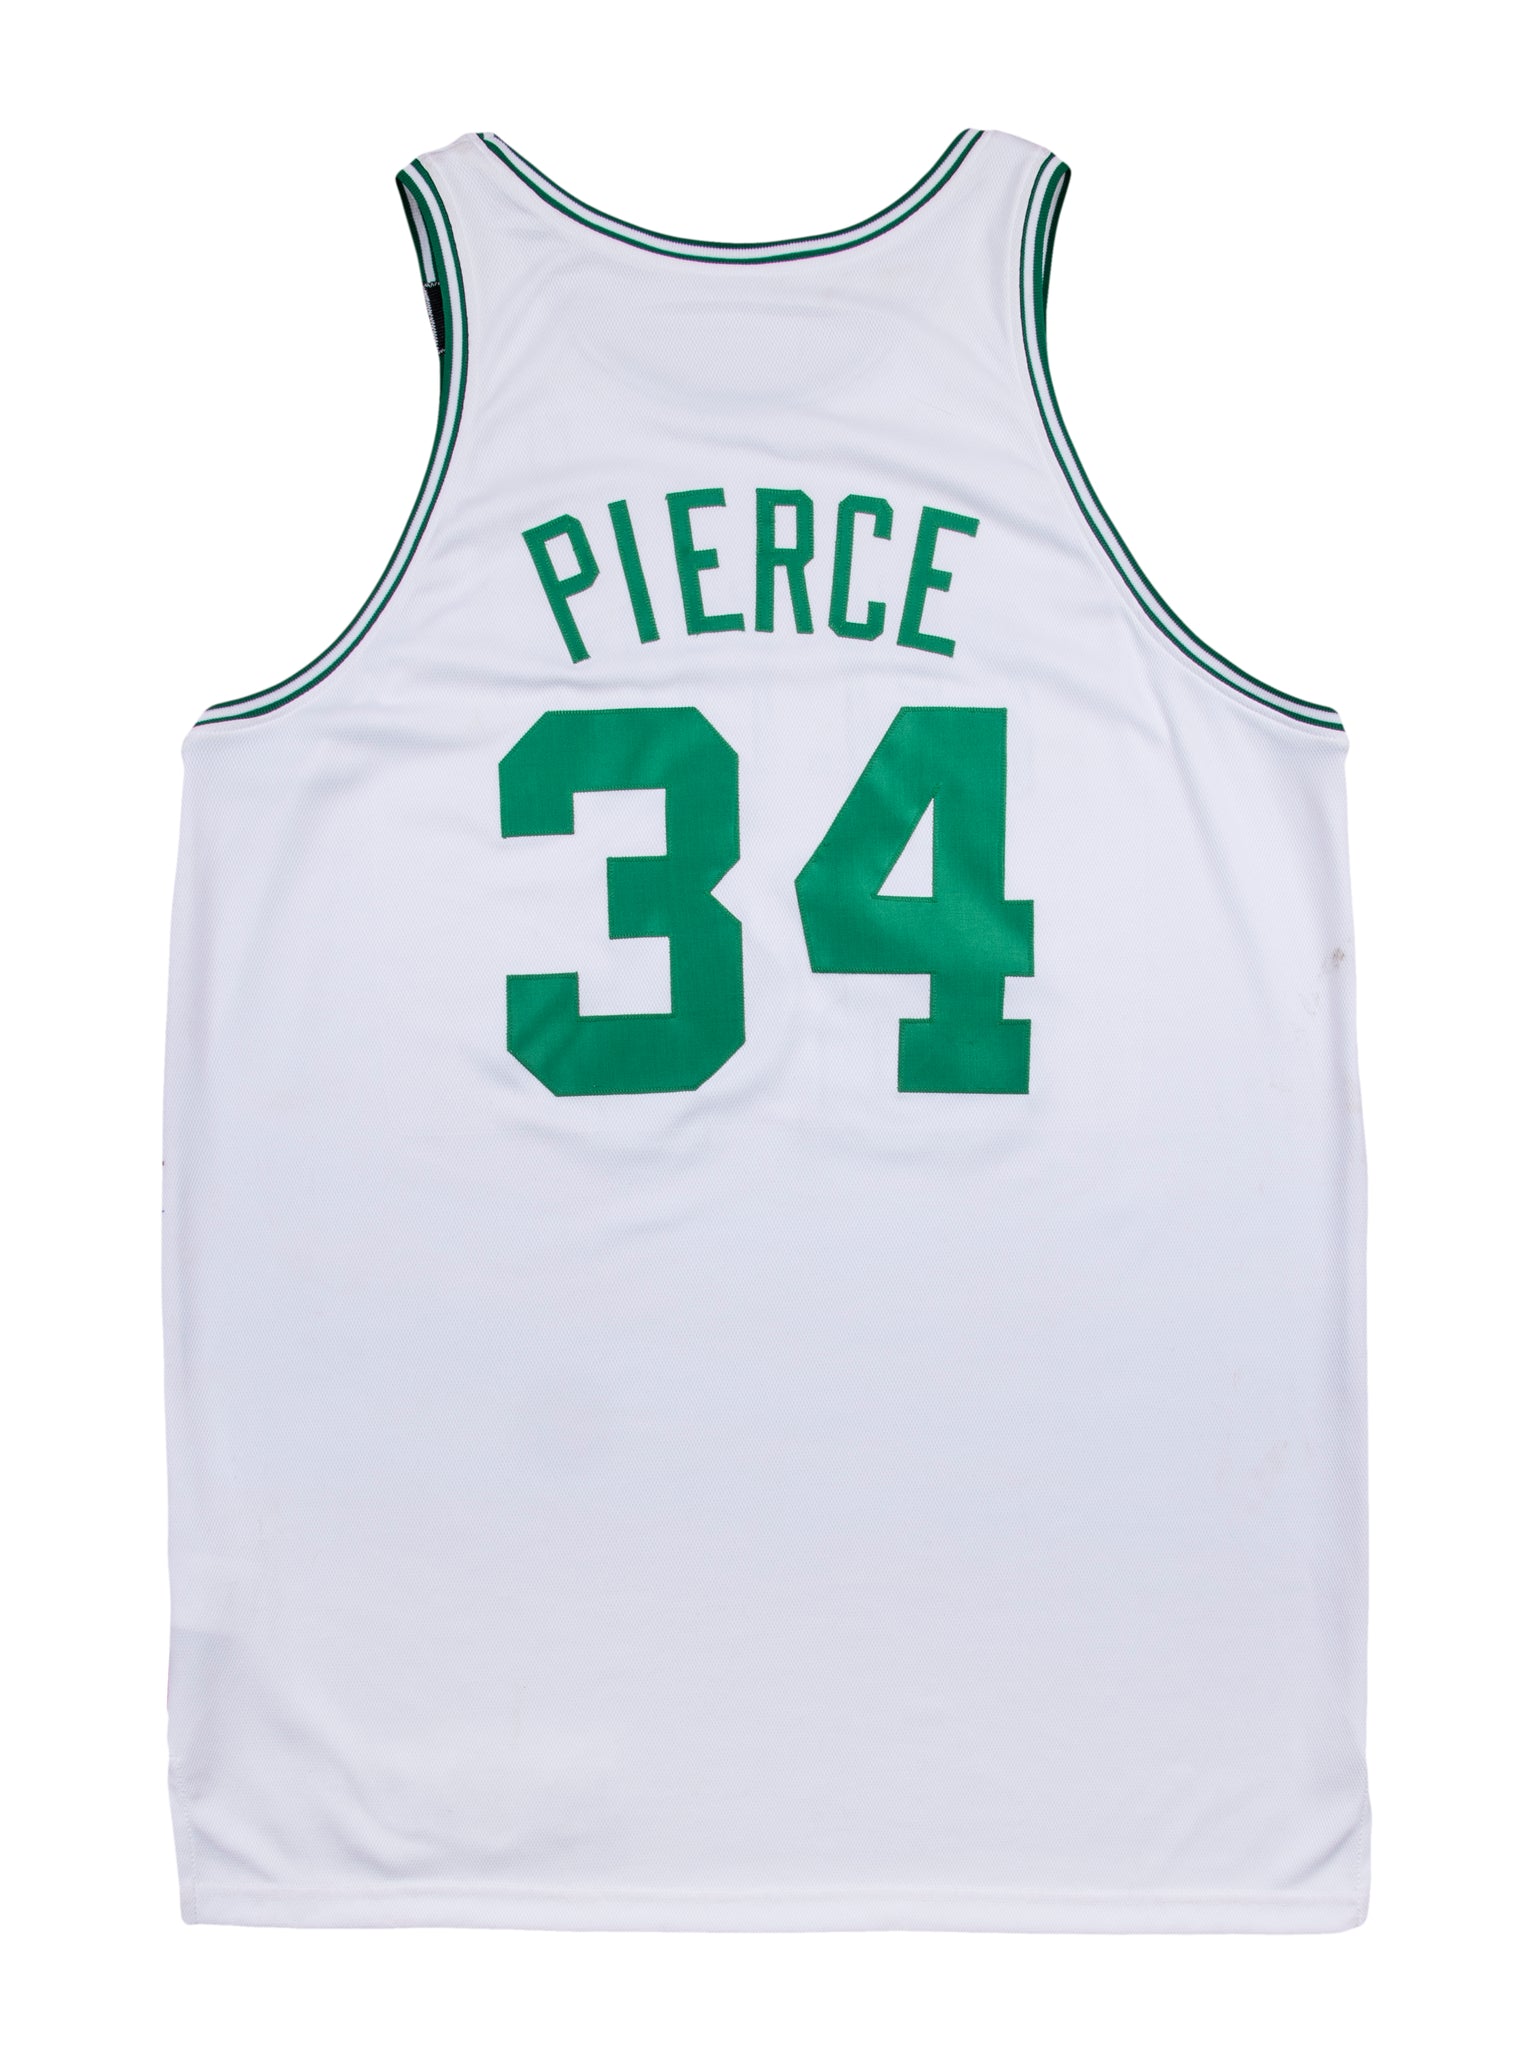 2000-2001 Paul Pierce Game Used and Signed Boston Celtics Home